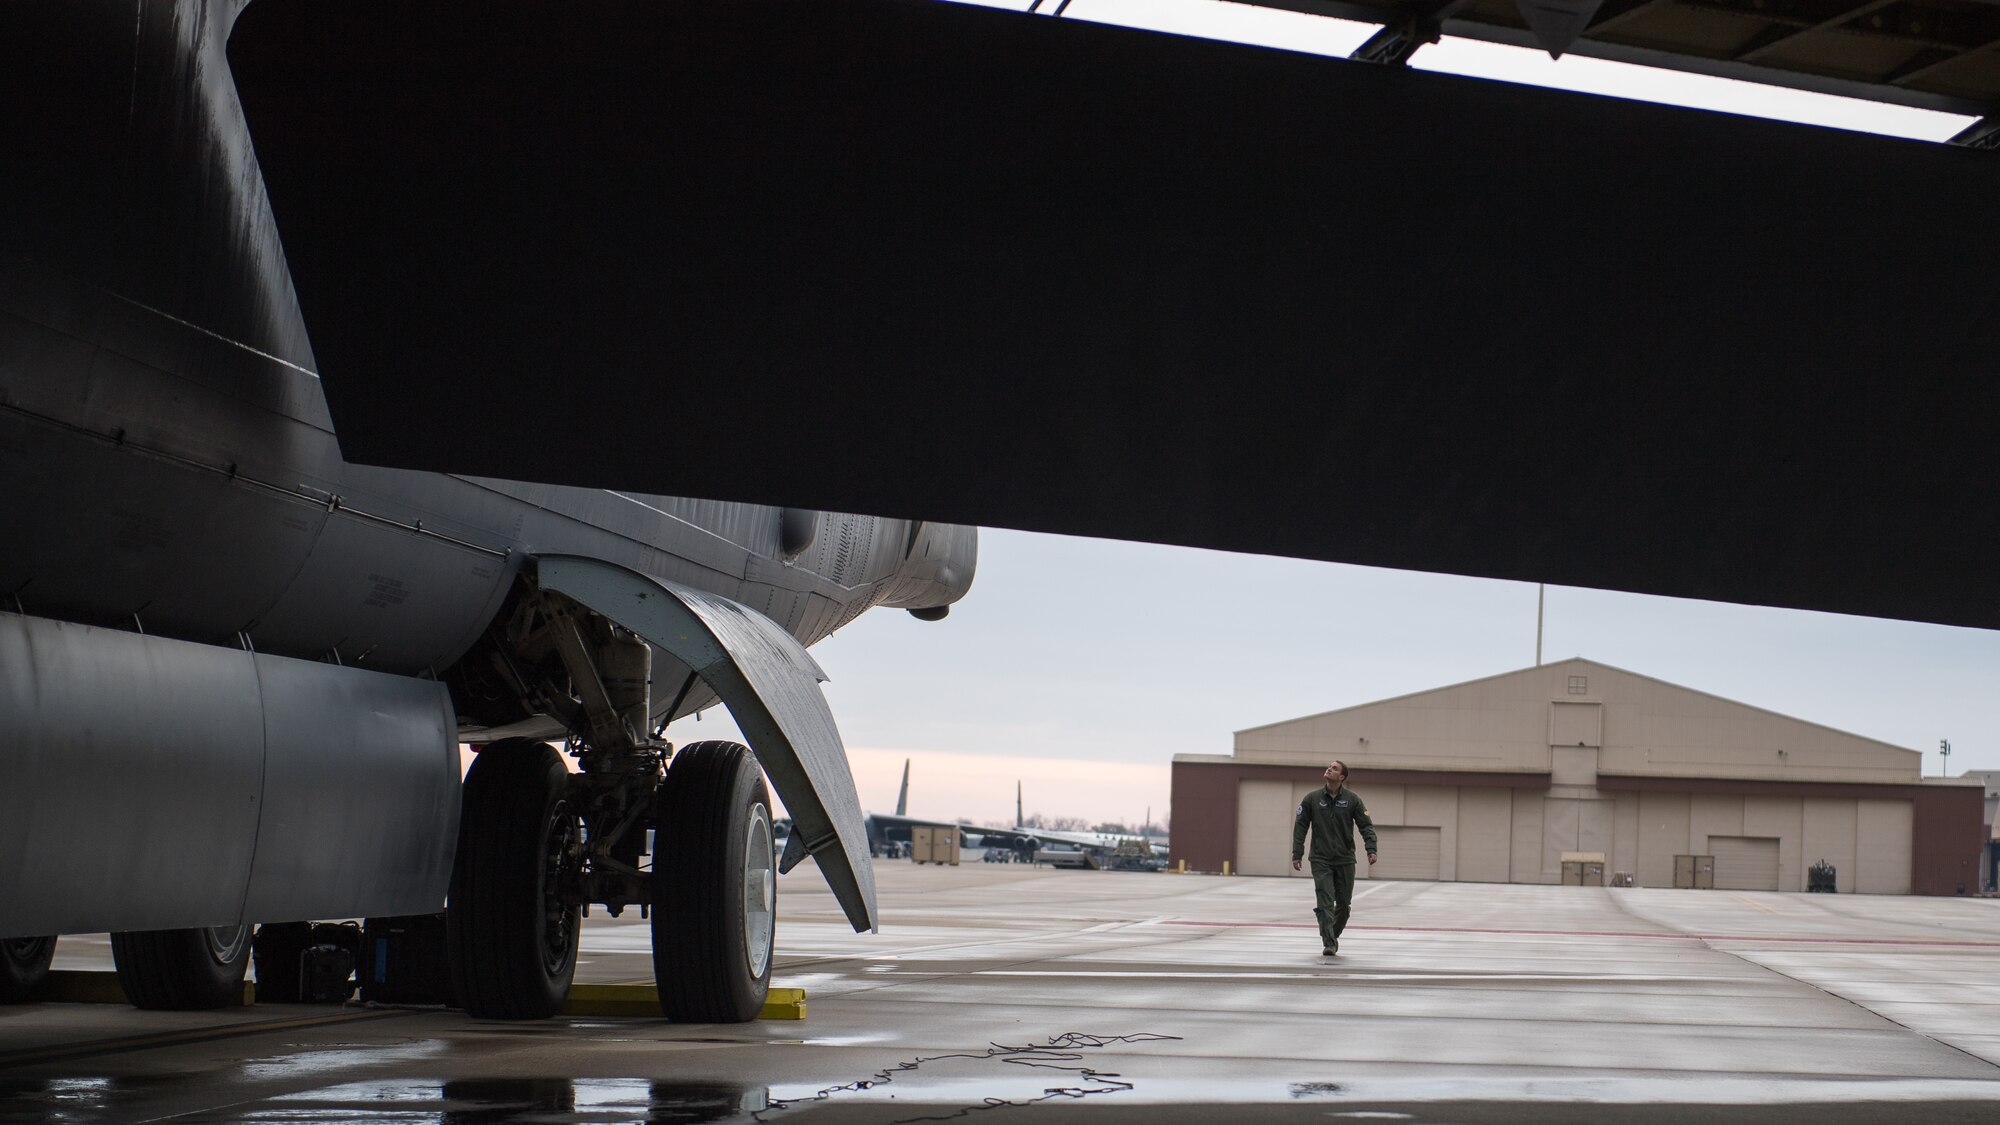 Capt. Shawn O’Donnell, 20th Bomb Squadron pilot, inspects a B-52H Stratofortress while preparing for take off at Barksdale Air Force Base, La., Nov. 21, 2019.